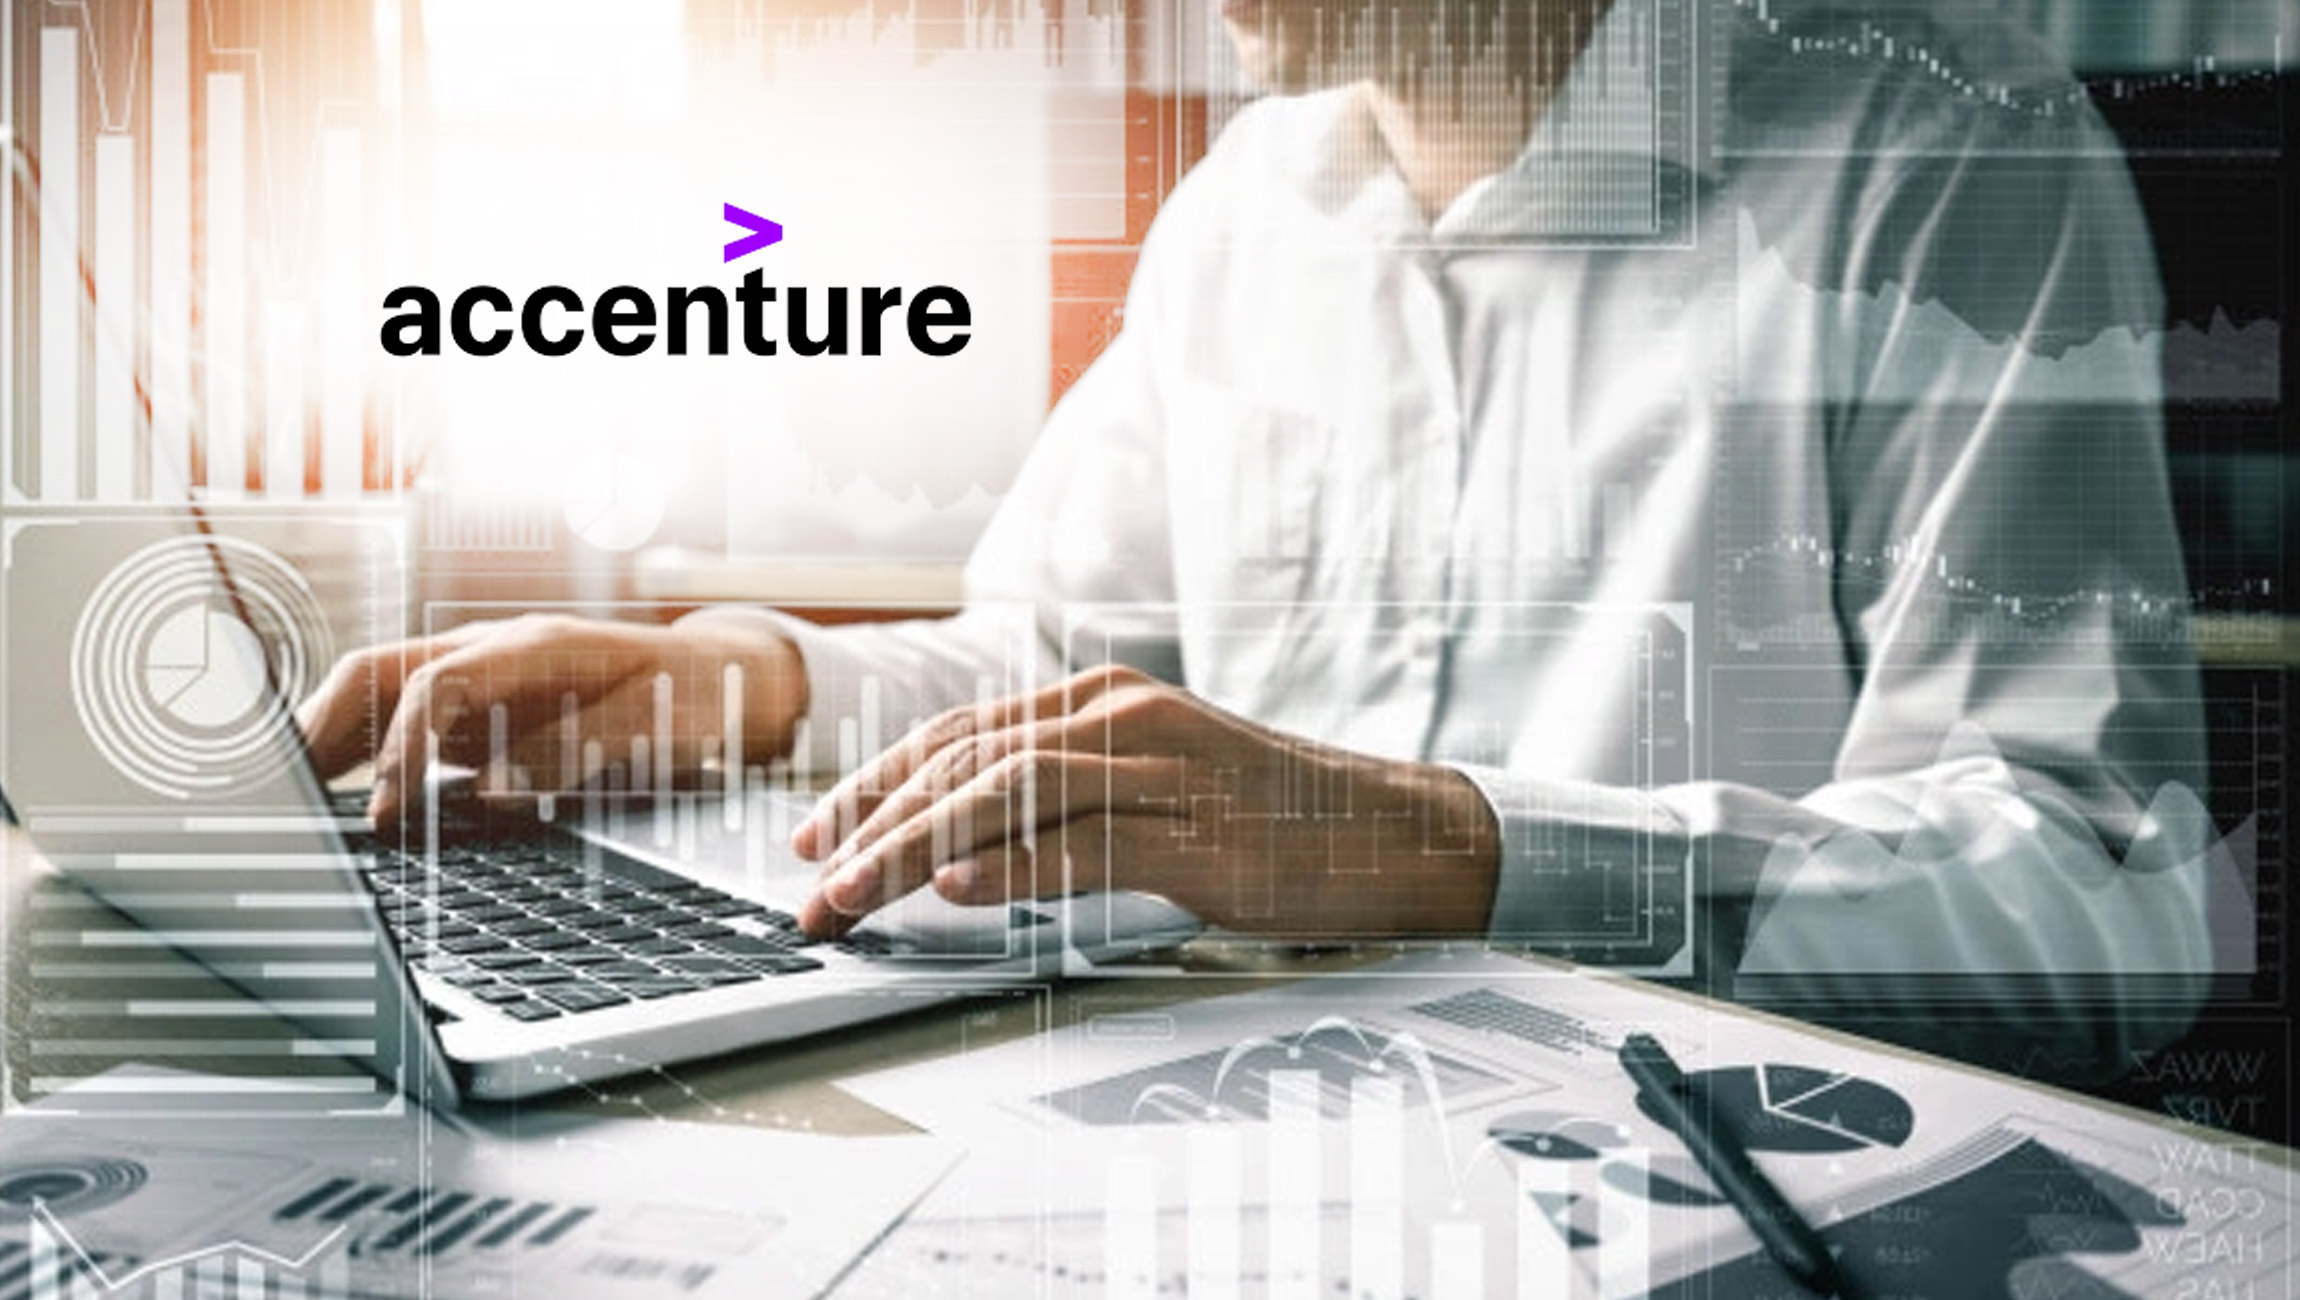 Accenture Report Details How New Technologies Are Enabling Industrial Companies to Bring Products to Market Faster